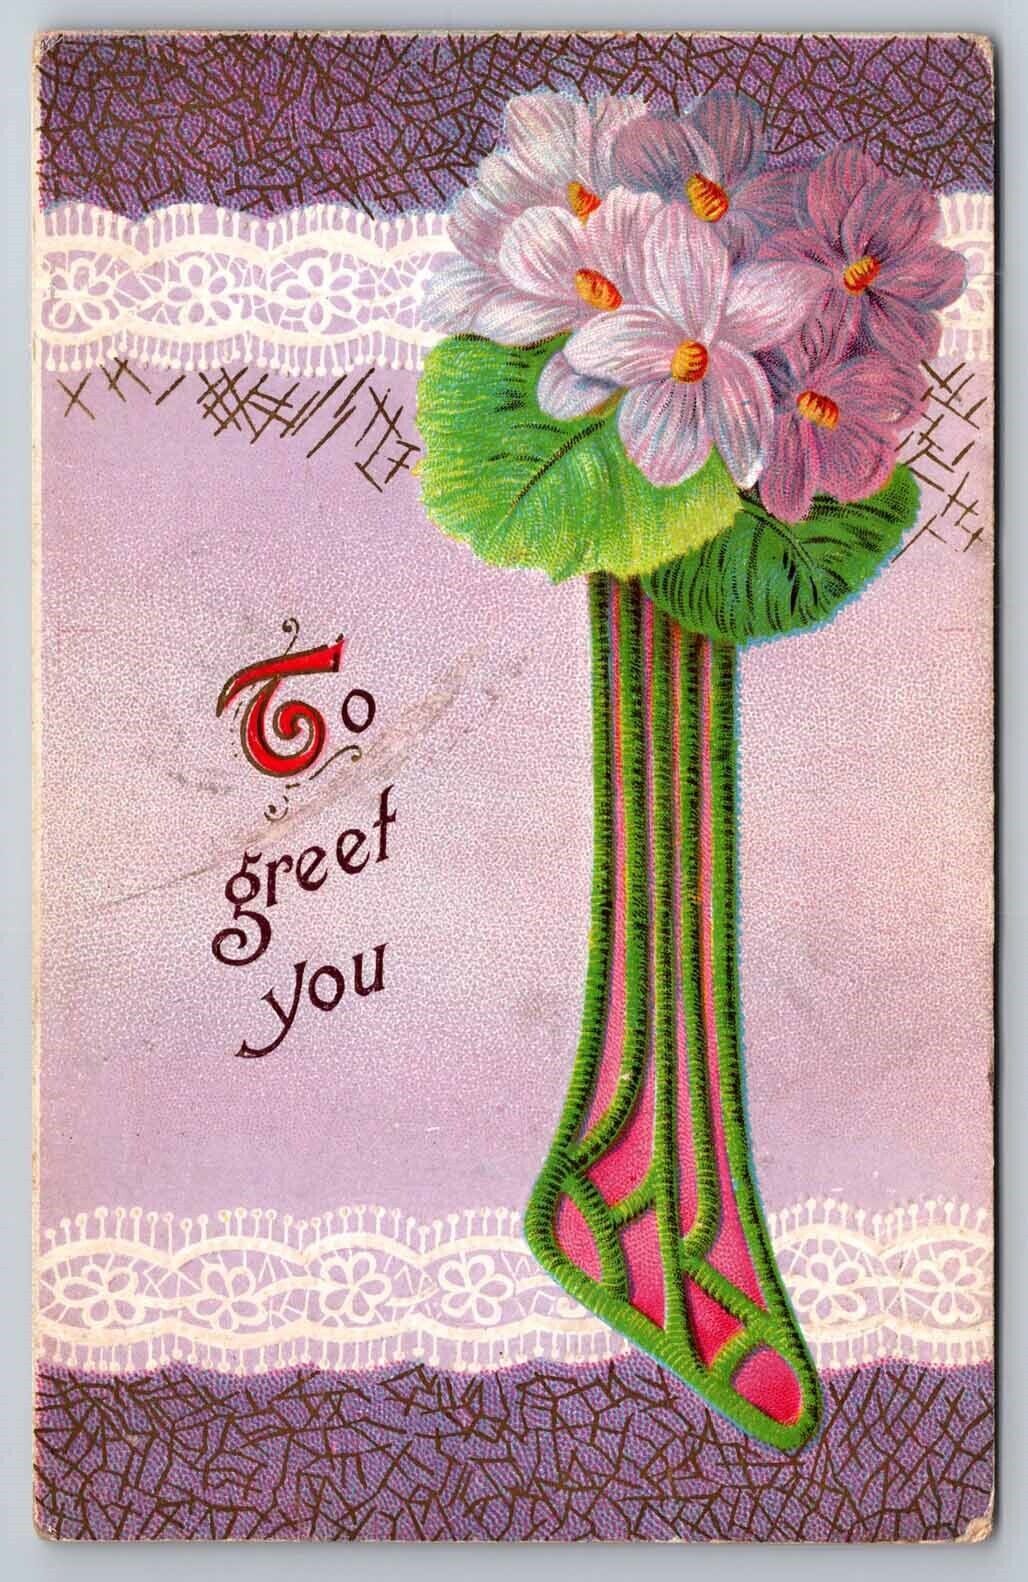 eStampsNet - To Greet You Postcard with Purple Flowers Embossed 1911